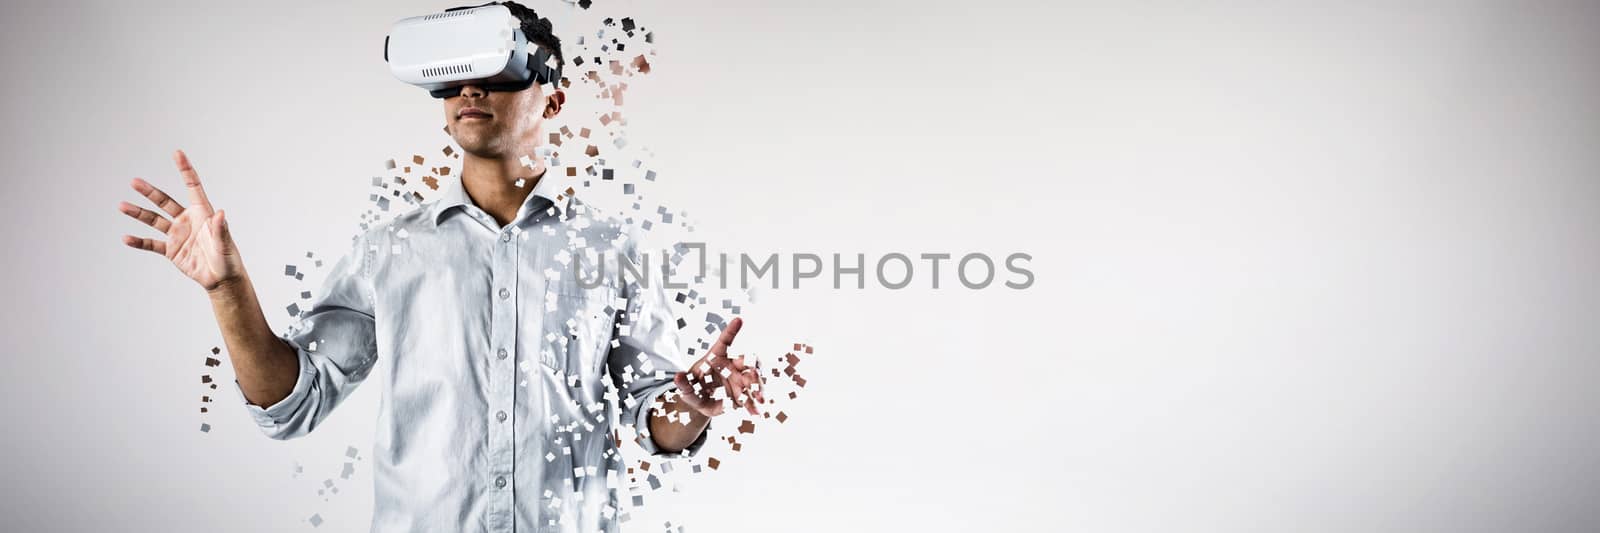 Man using virtual reality headset against grey background